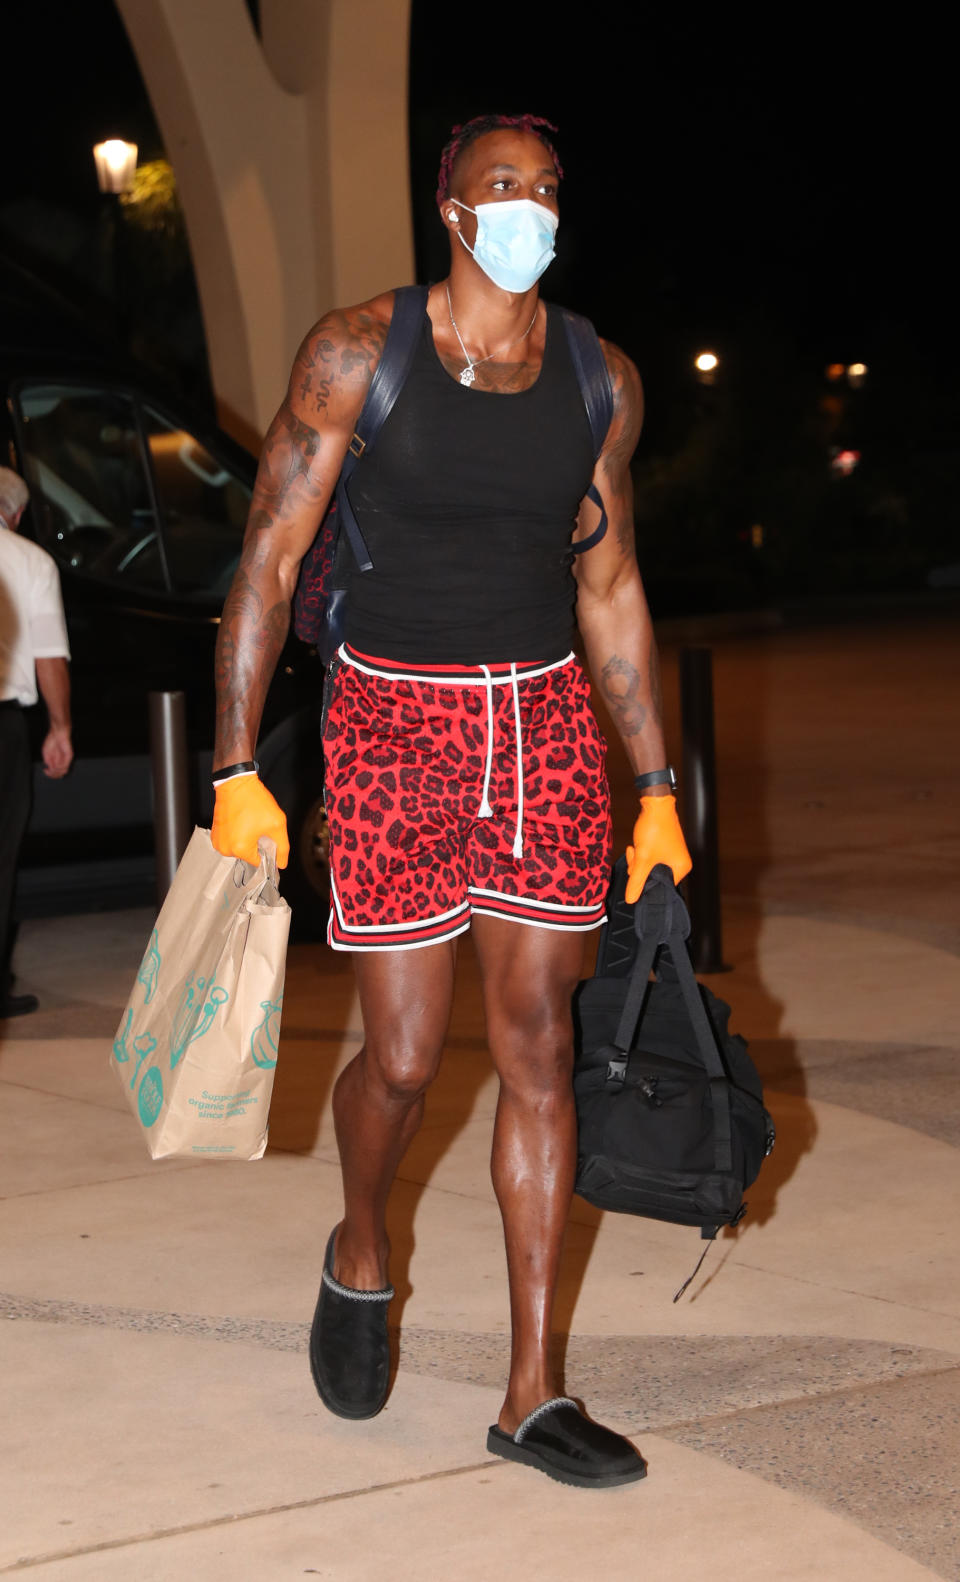 Dwight Howard of the Los Angeles Lakers arrives at the hotel as part of the NBA Restart 2020 on July 9, 2020 in Orlando, Florida. (Photo by Joe Murphy/NBAE via Getty Images)